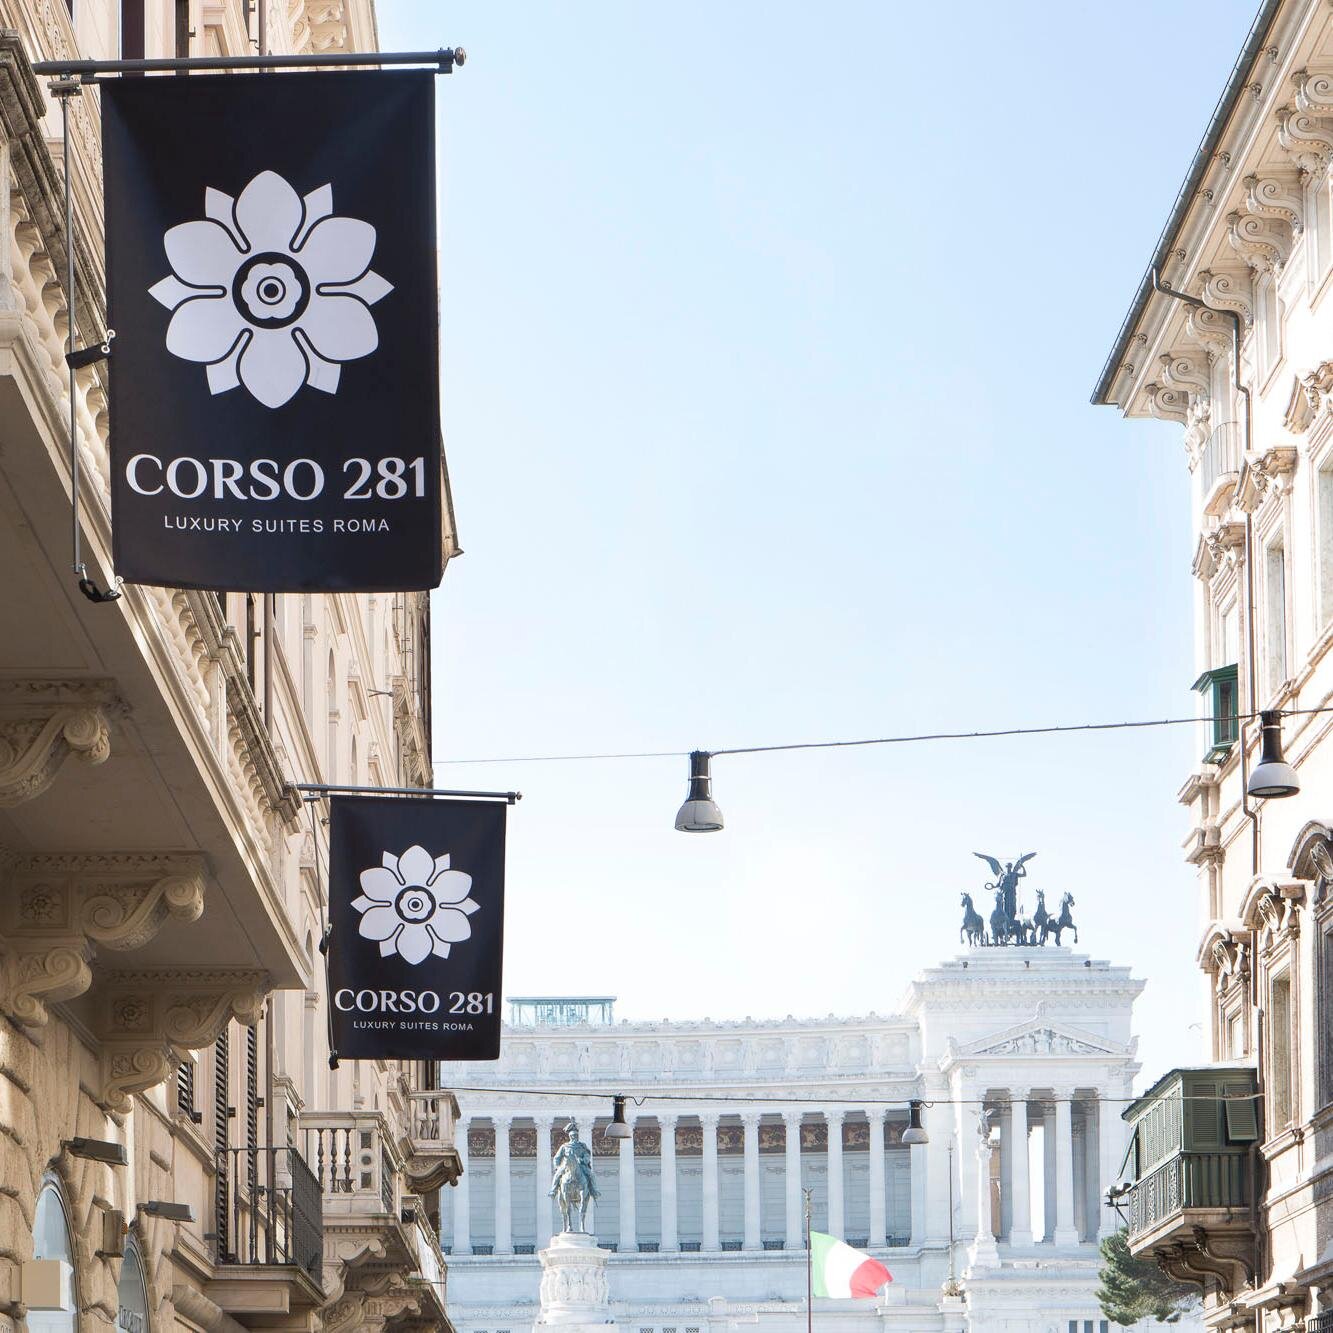 In an ideal location, in the #heart of the historical centre of #Rome, #Corso281 offers unique #hospitality, giving the feeling of being at #home.